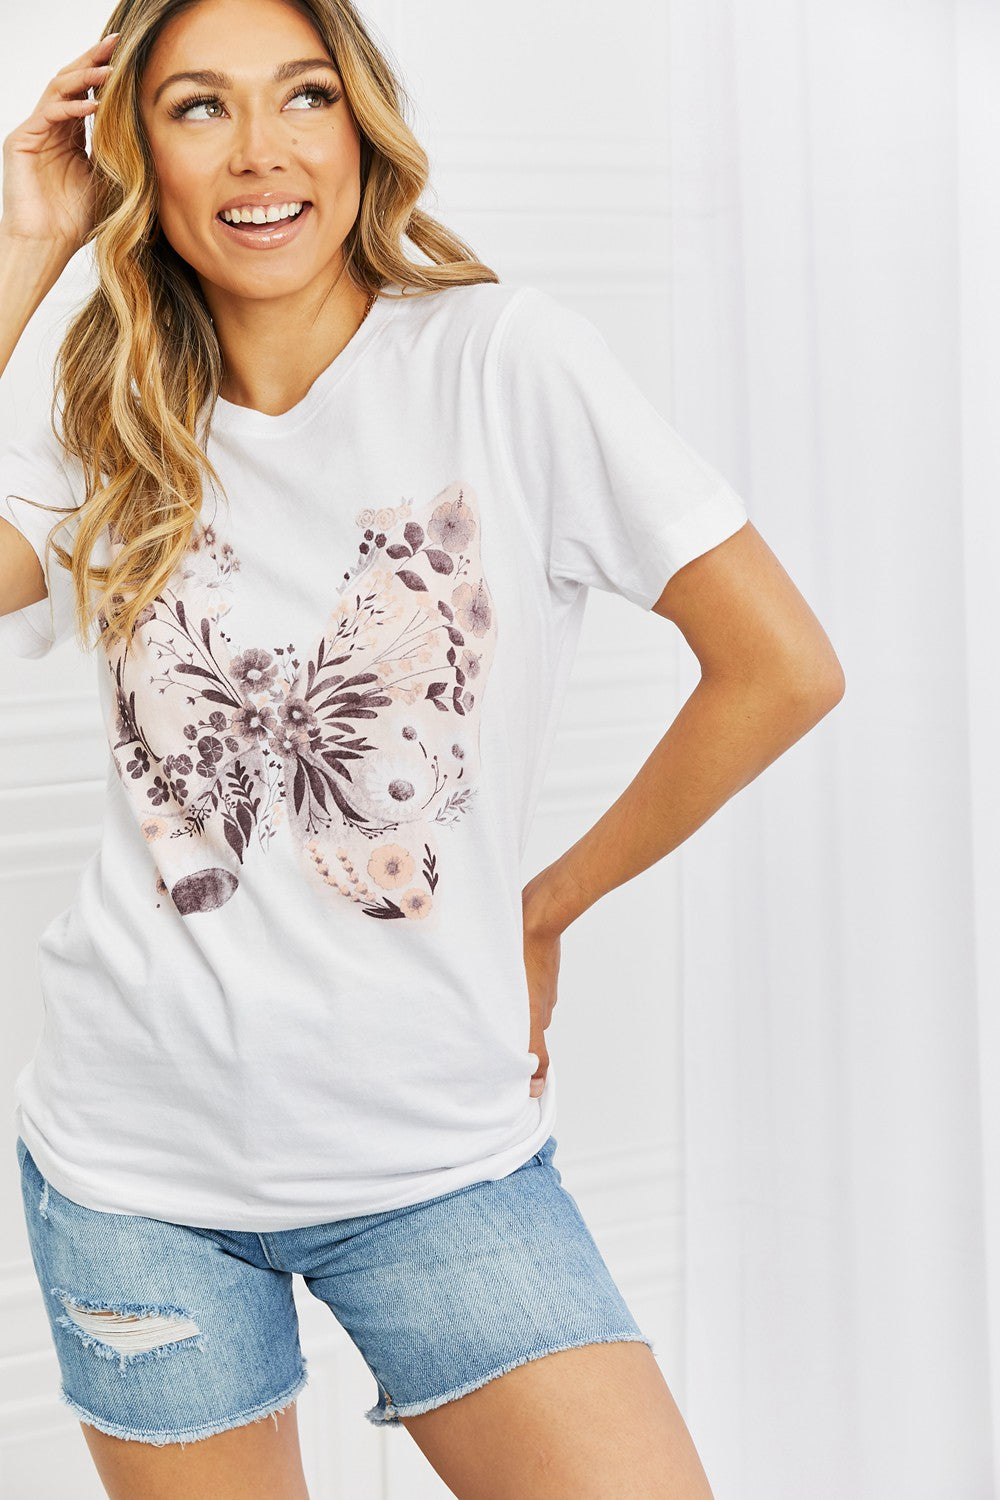 mineB You Give Me Butterflies Graphic T-Shirt-Short Sleeve Tops-Inspired by Justeen-Women's Clothing Boutique in Chicago, Illinois